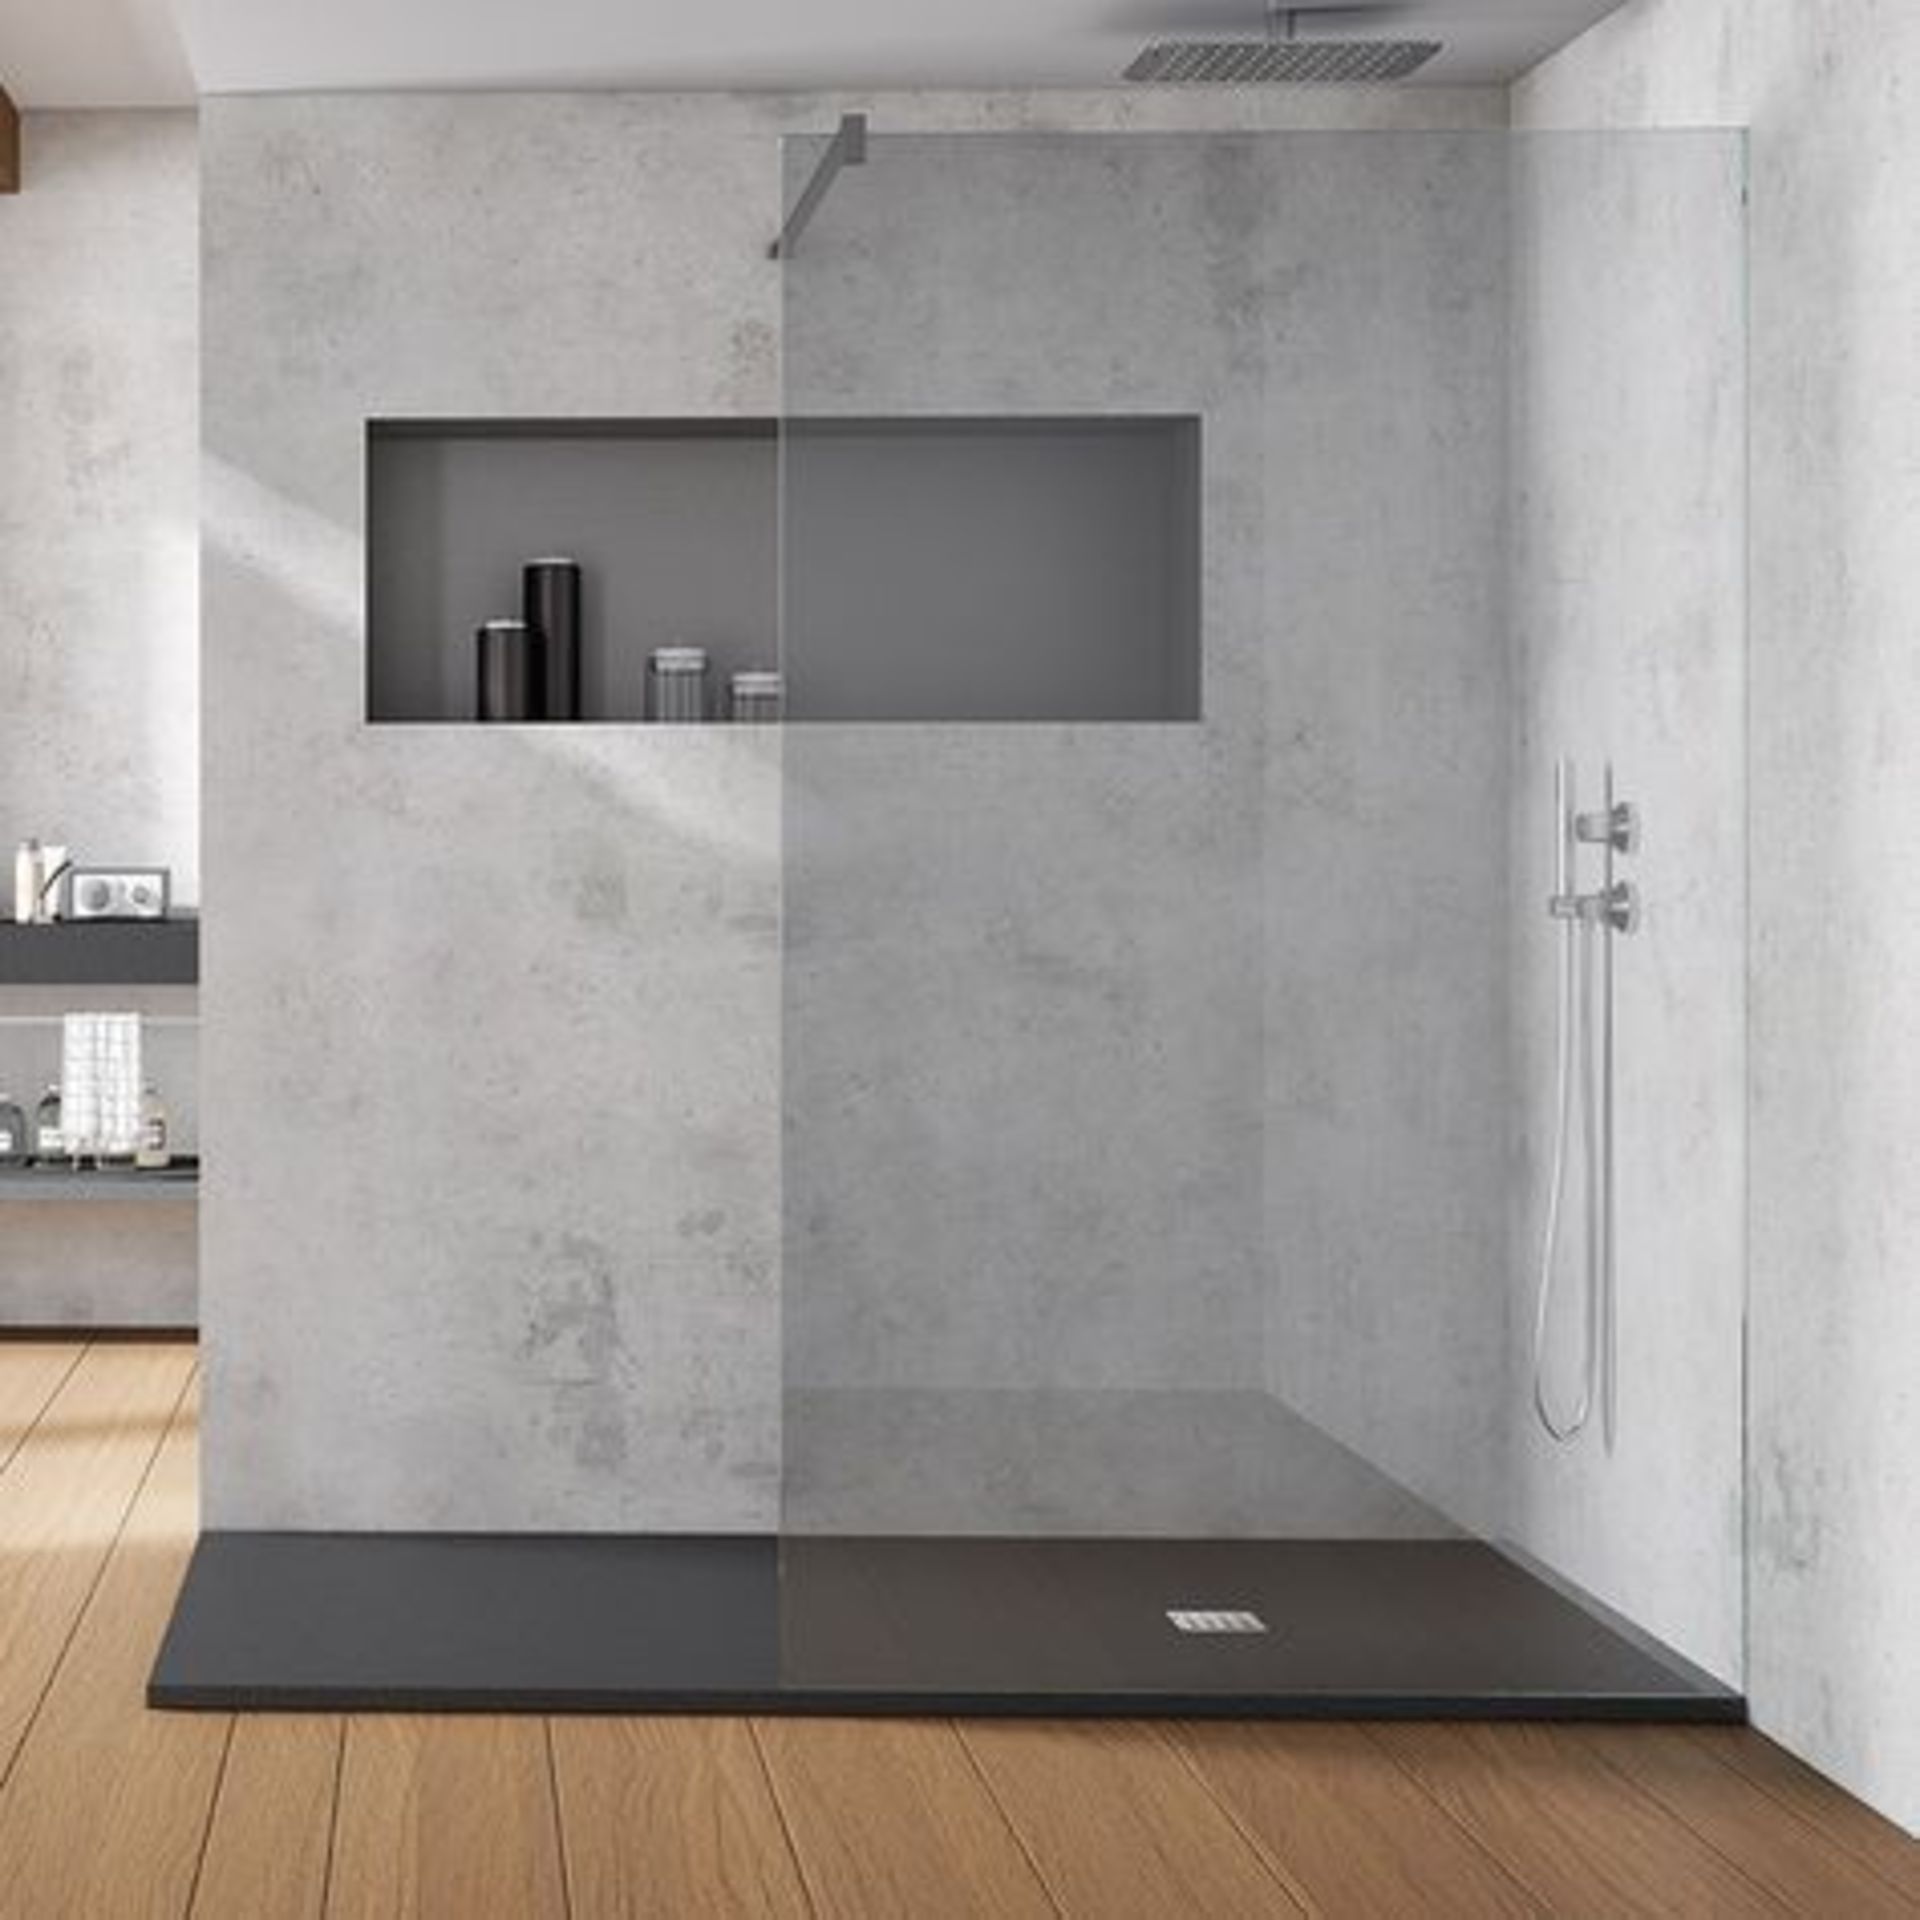 NEW (D9) 1600x900mm Rectangular Slate Effect Shower Tray in Grey. Manufactured in the UK from h... - Image 2 of 5